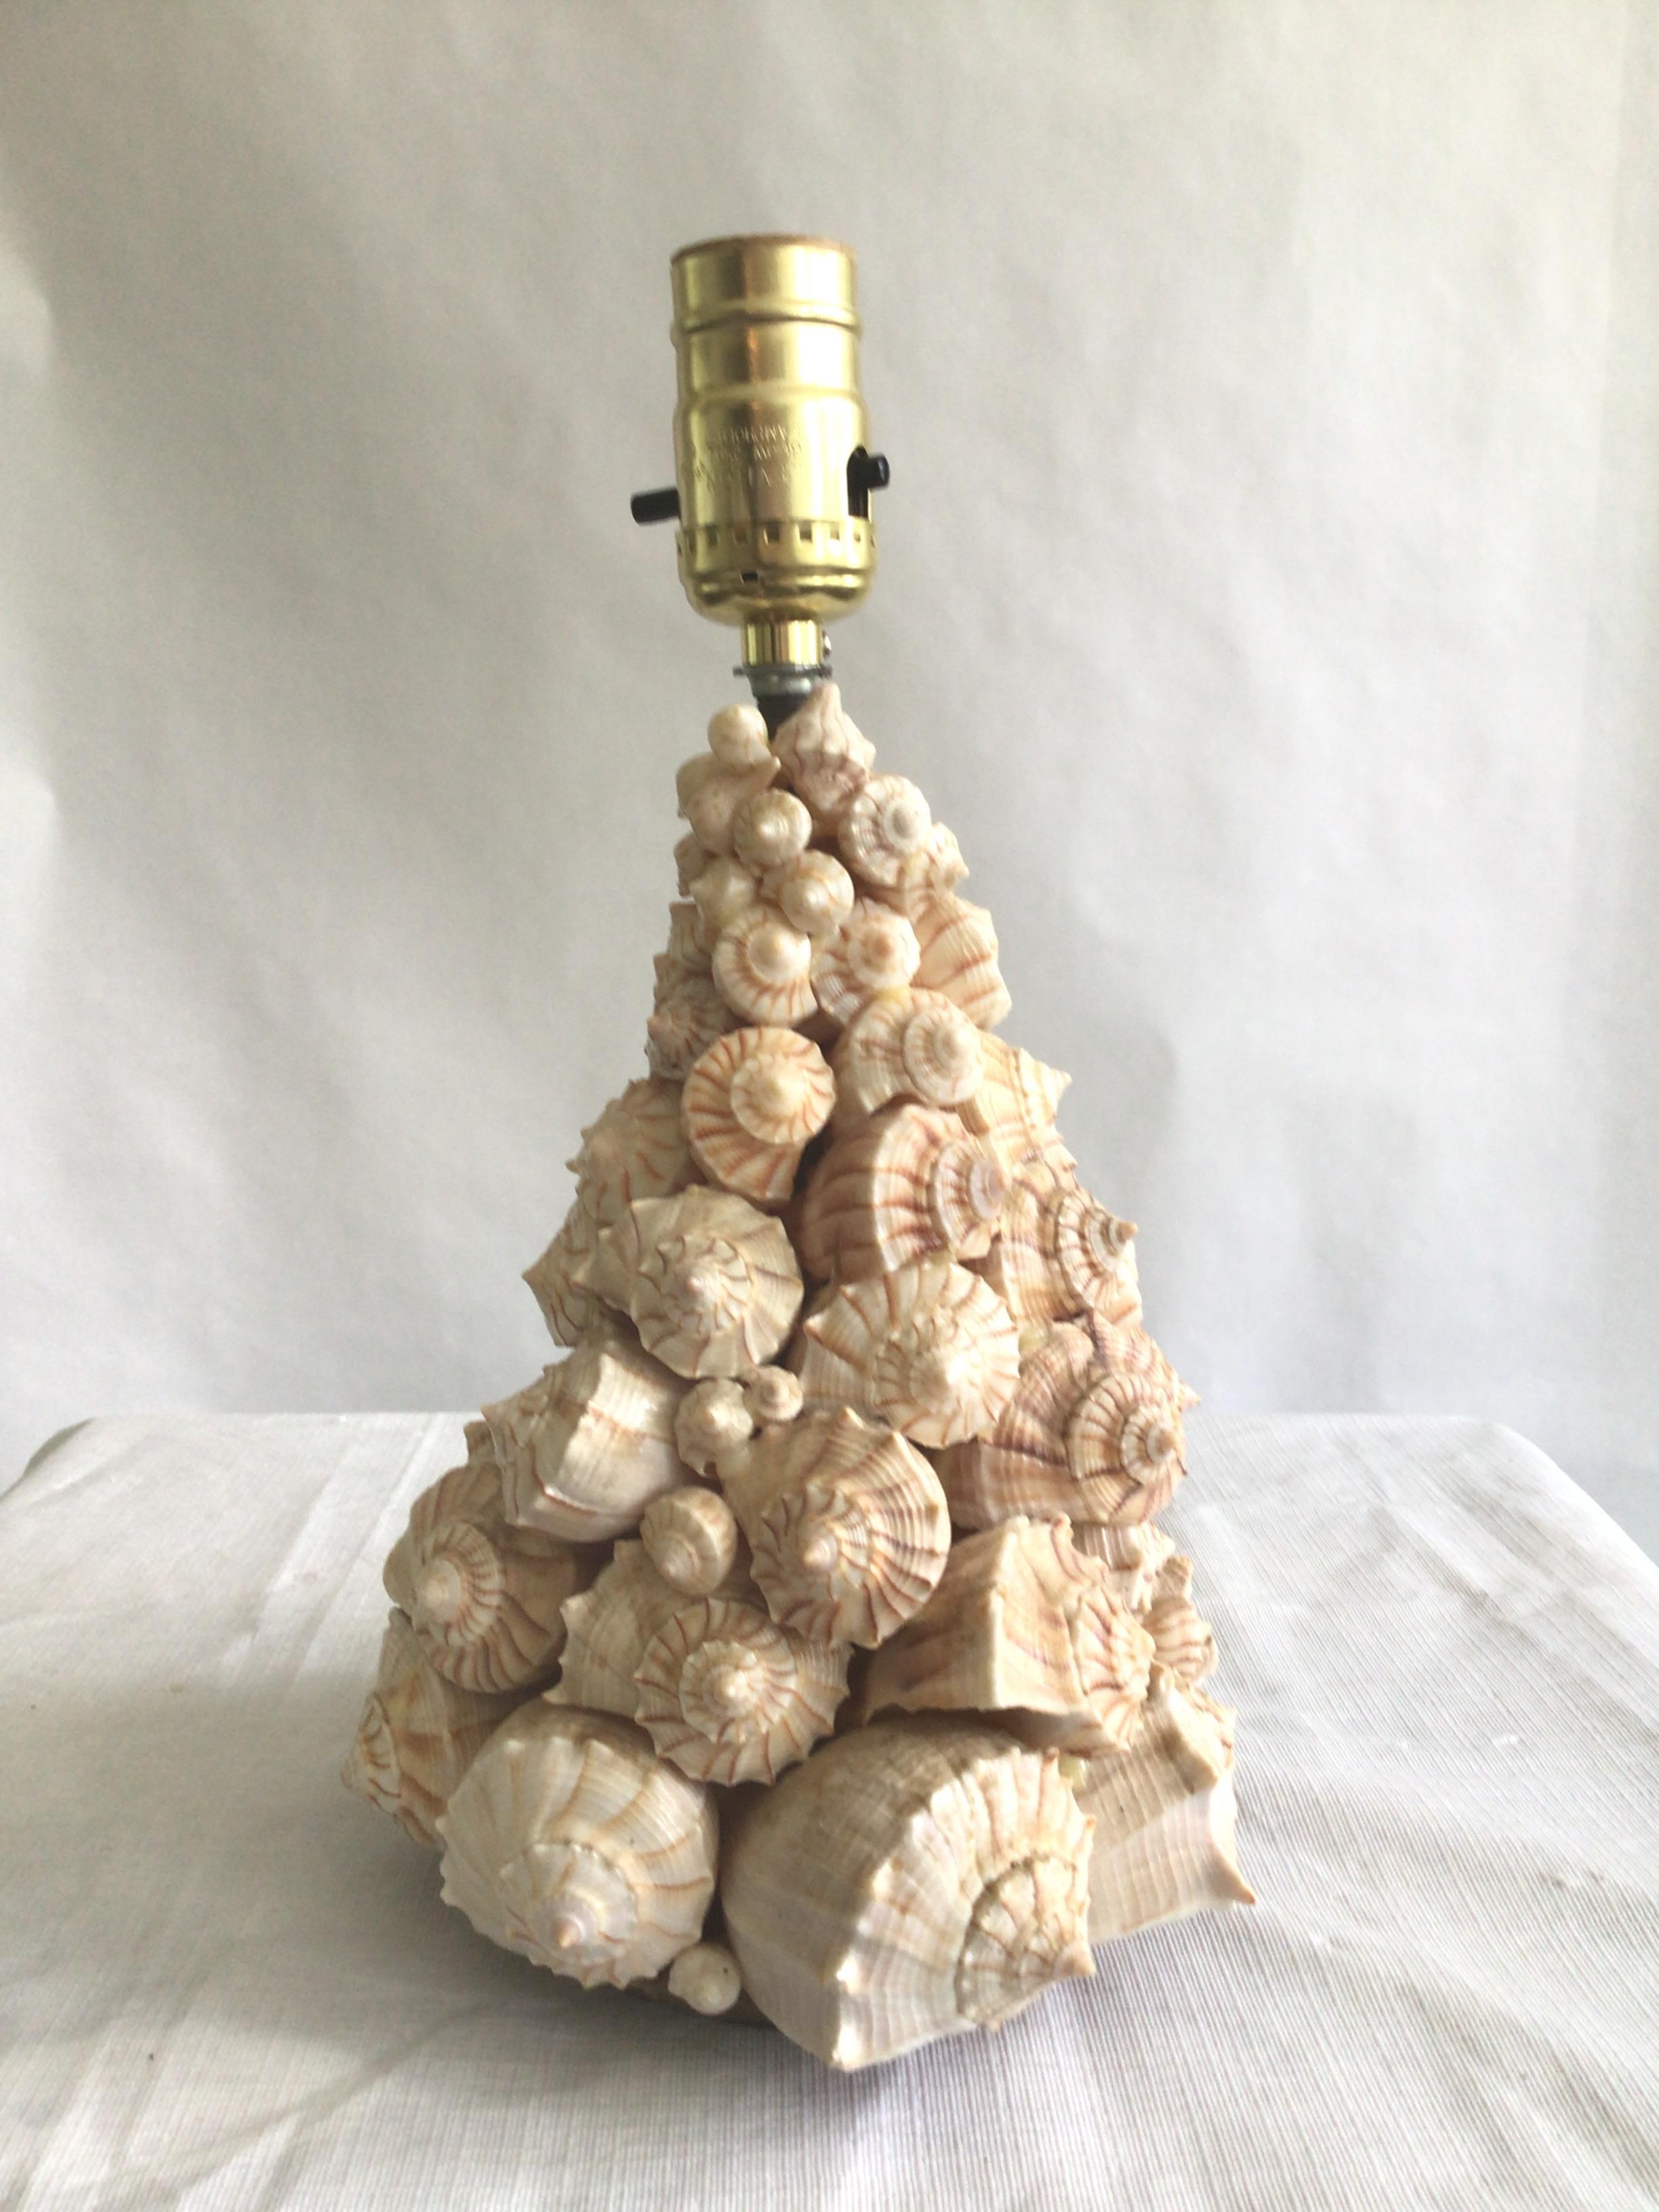 1960s Small Shell Table Lamp
Made of natural small conch shells
Nautical or perfect for a tropical beach house 
This small table lamp would look stunning on a bar countertop 
Height to Top of Socket
Needs Rewiring